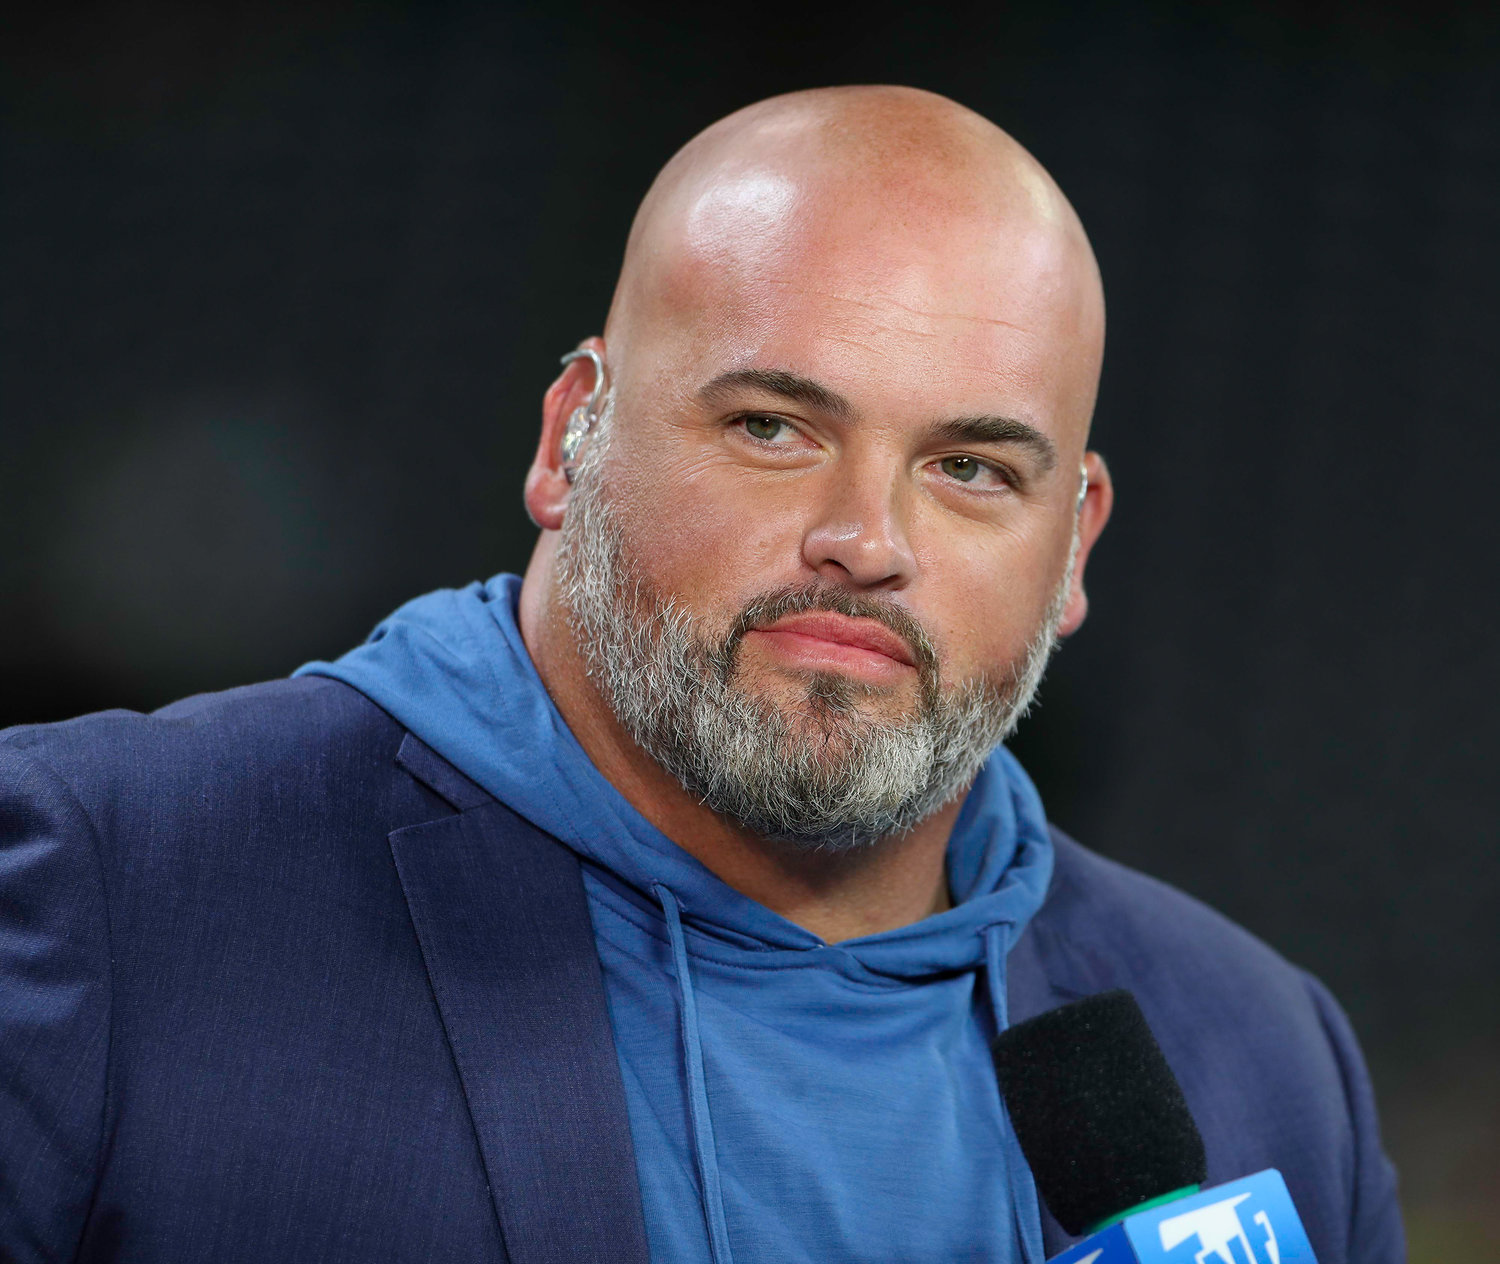 Recently retired offensive tackle Andrew Whitworth on the set of Amazon’s Thursday Night Football pregame show before the start of an NFL preseason game between the Texans and the 49ers in Houston, Texas, on August 25, 2022.